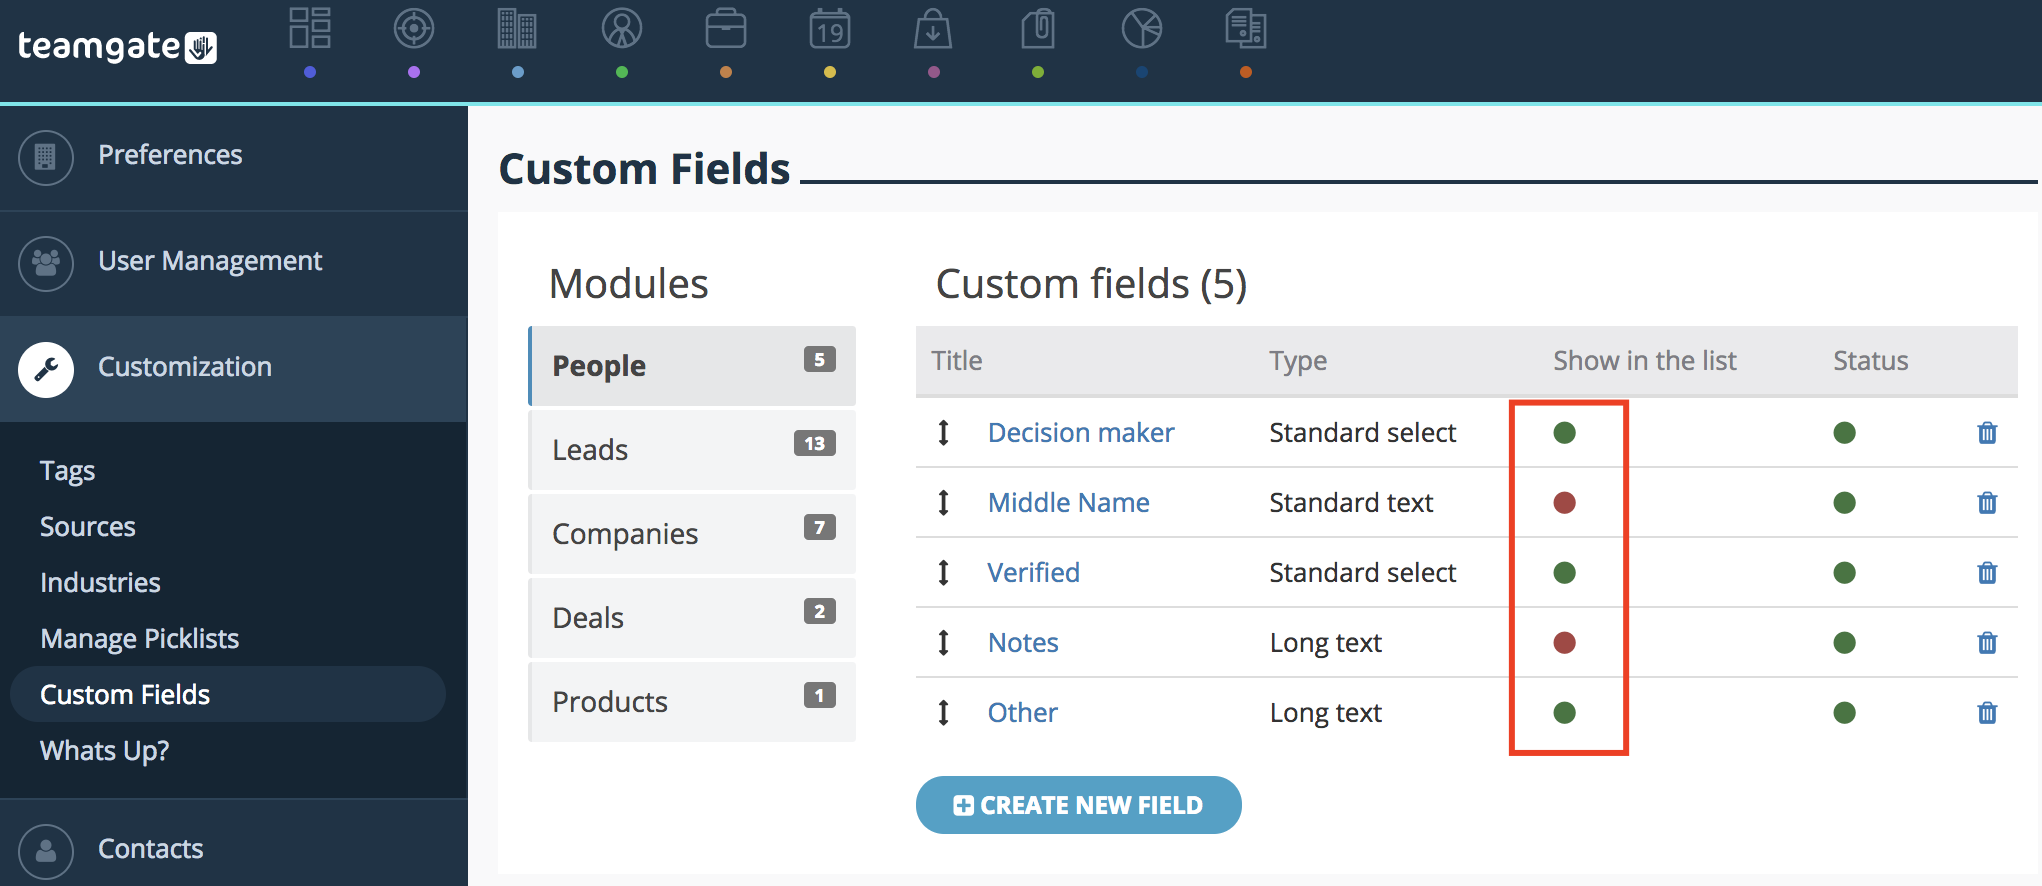 show-in-the-list-custom-fields-settings-Teamgate.png